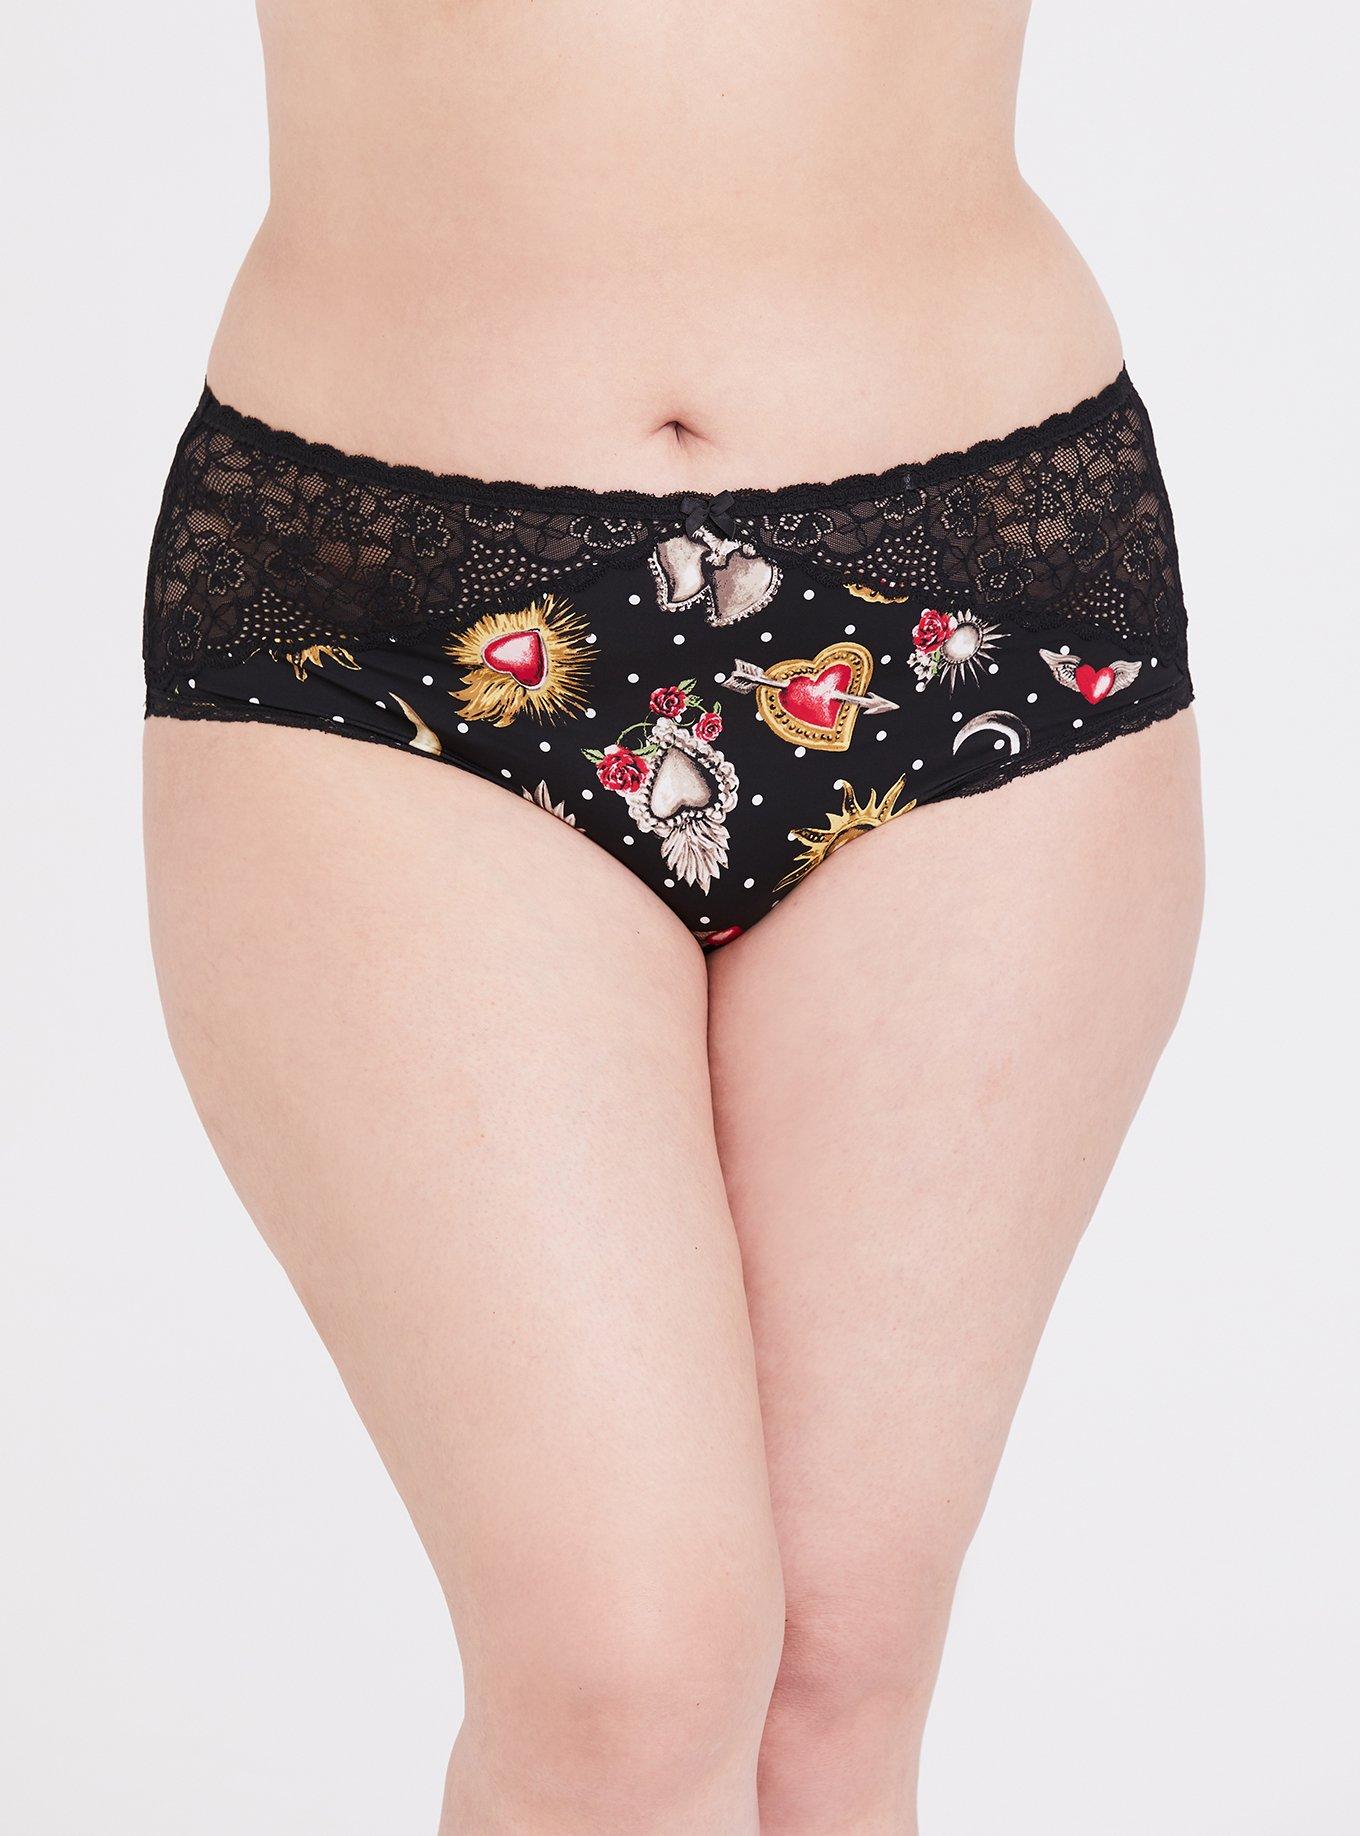 N-Gal Women's Cheeky Lace Mid Waist Floral Underwear Lingerie Brief Panty